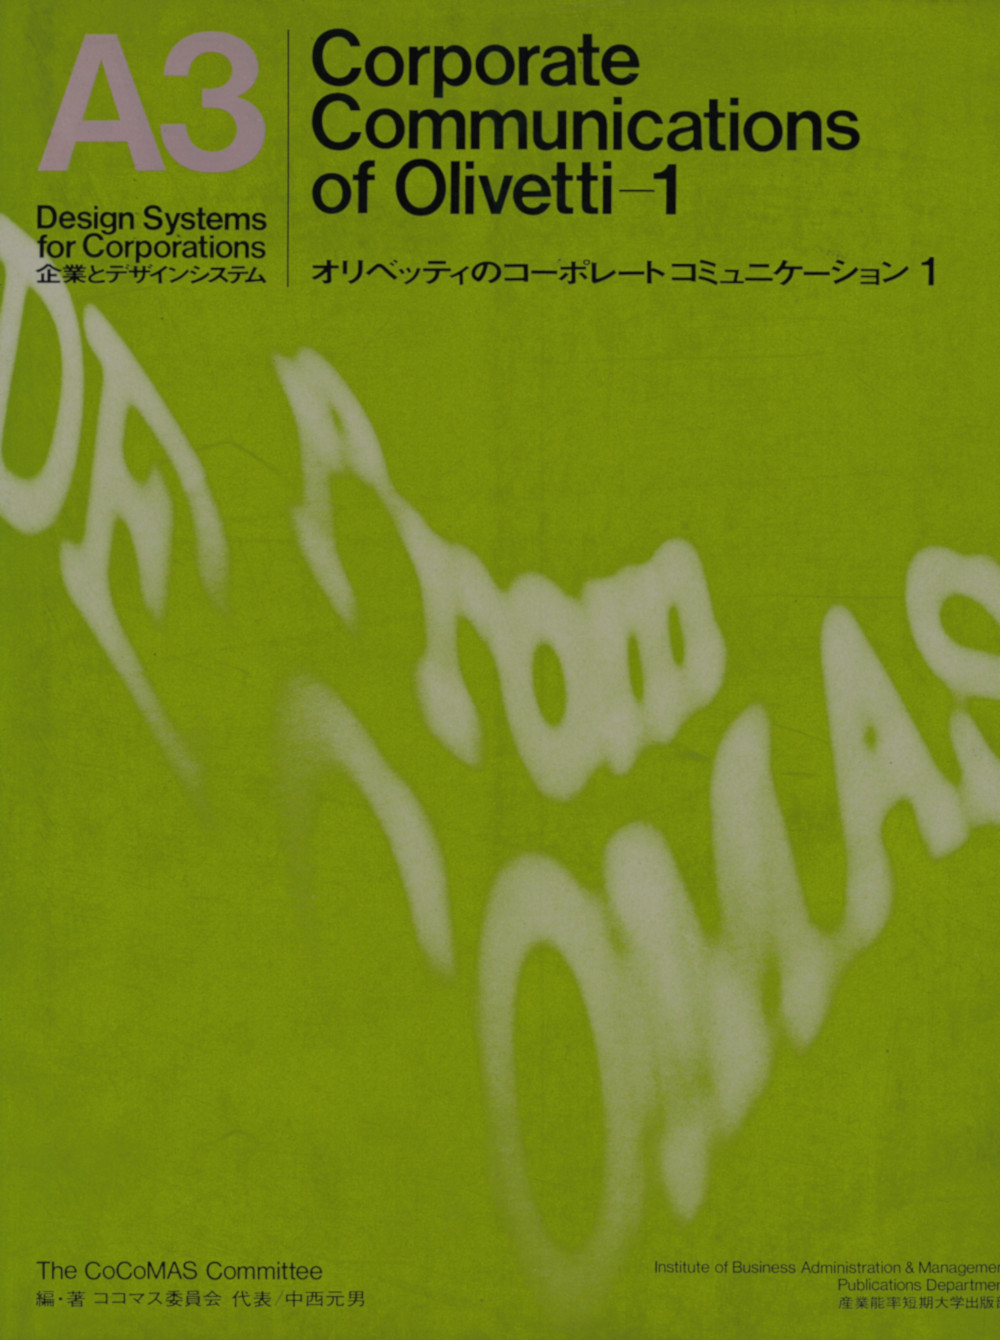 A3 Corporate Communications of Olivetti – 1